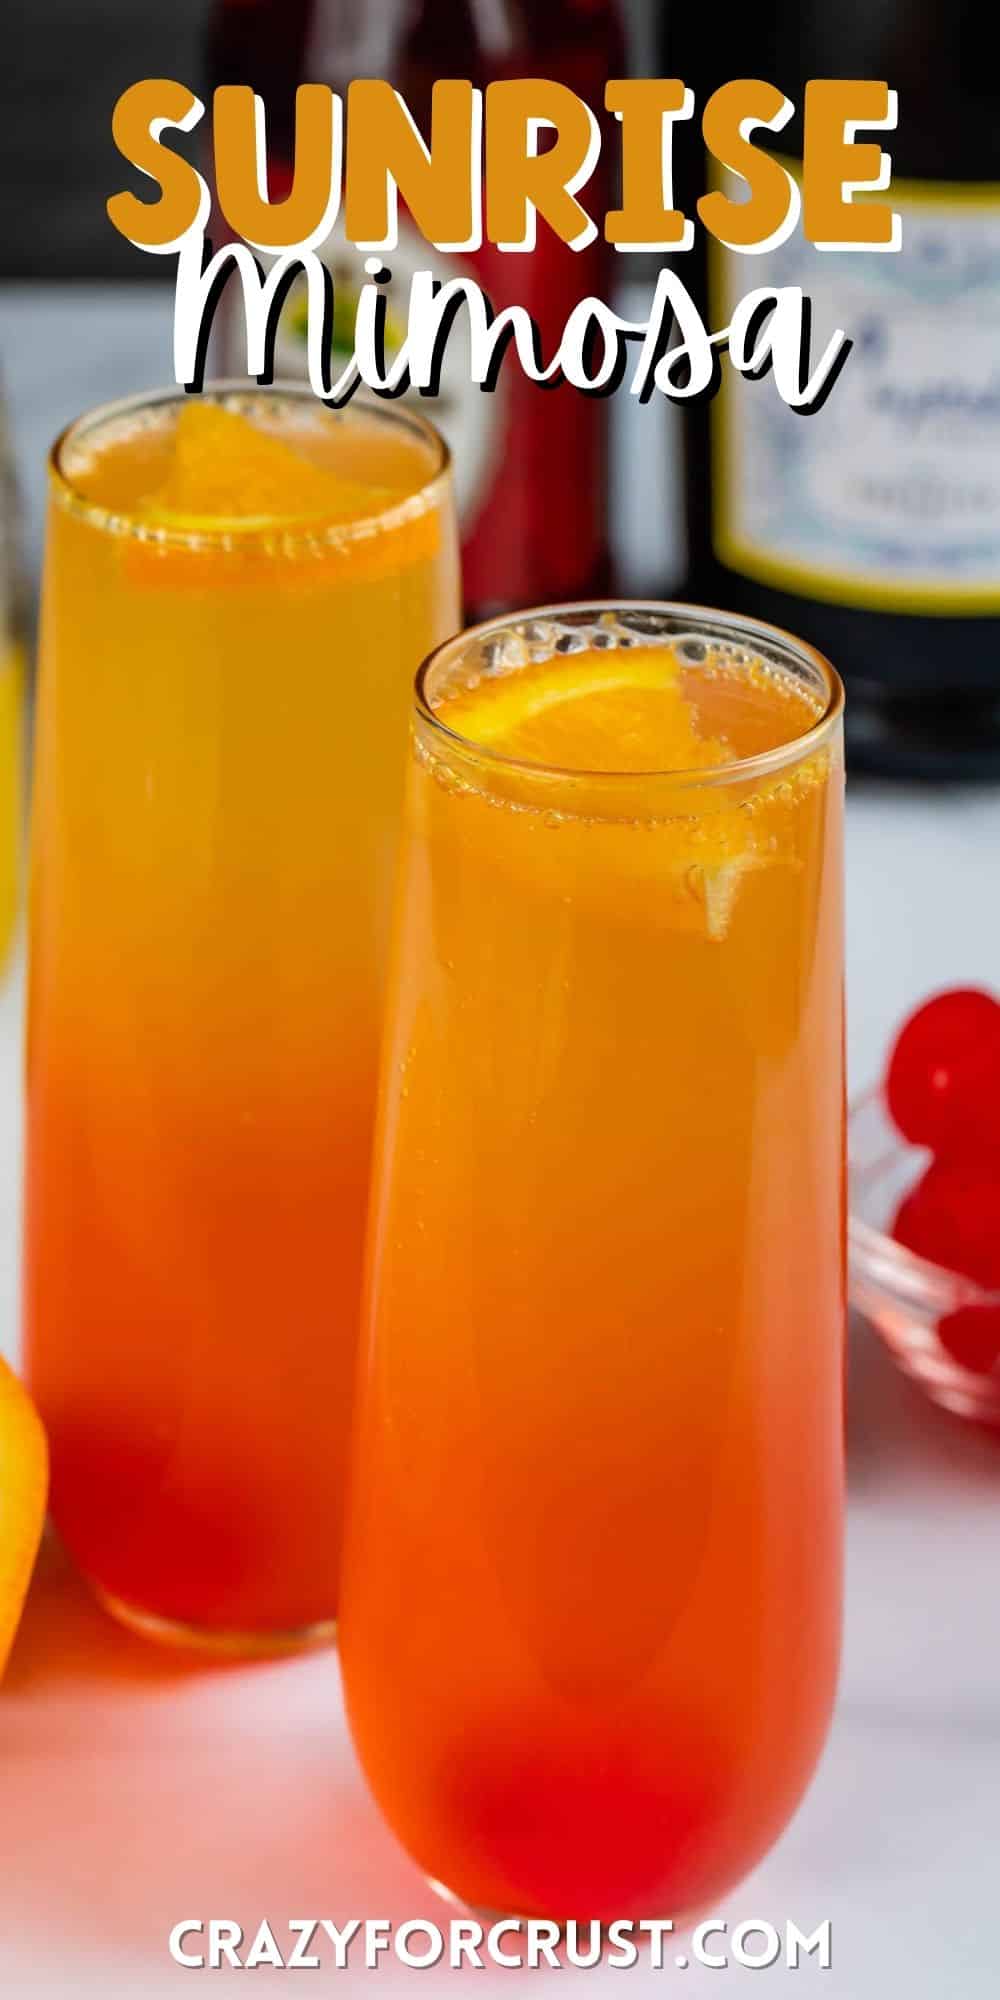 two glasses of orange and red ombre drink inside with words on the image